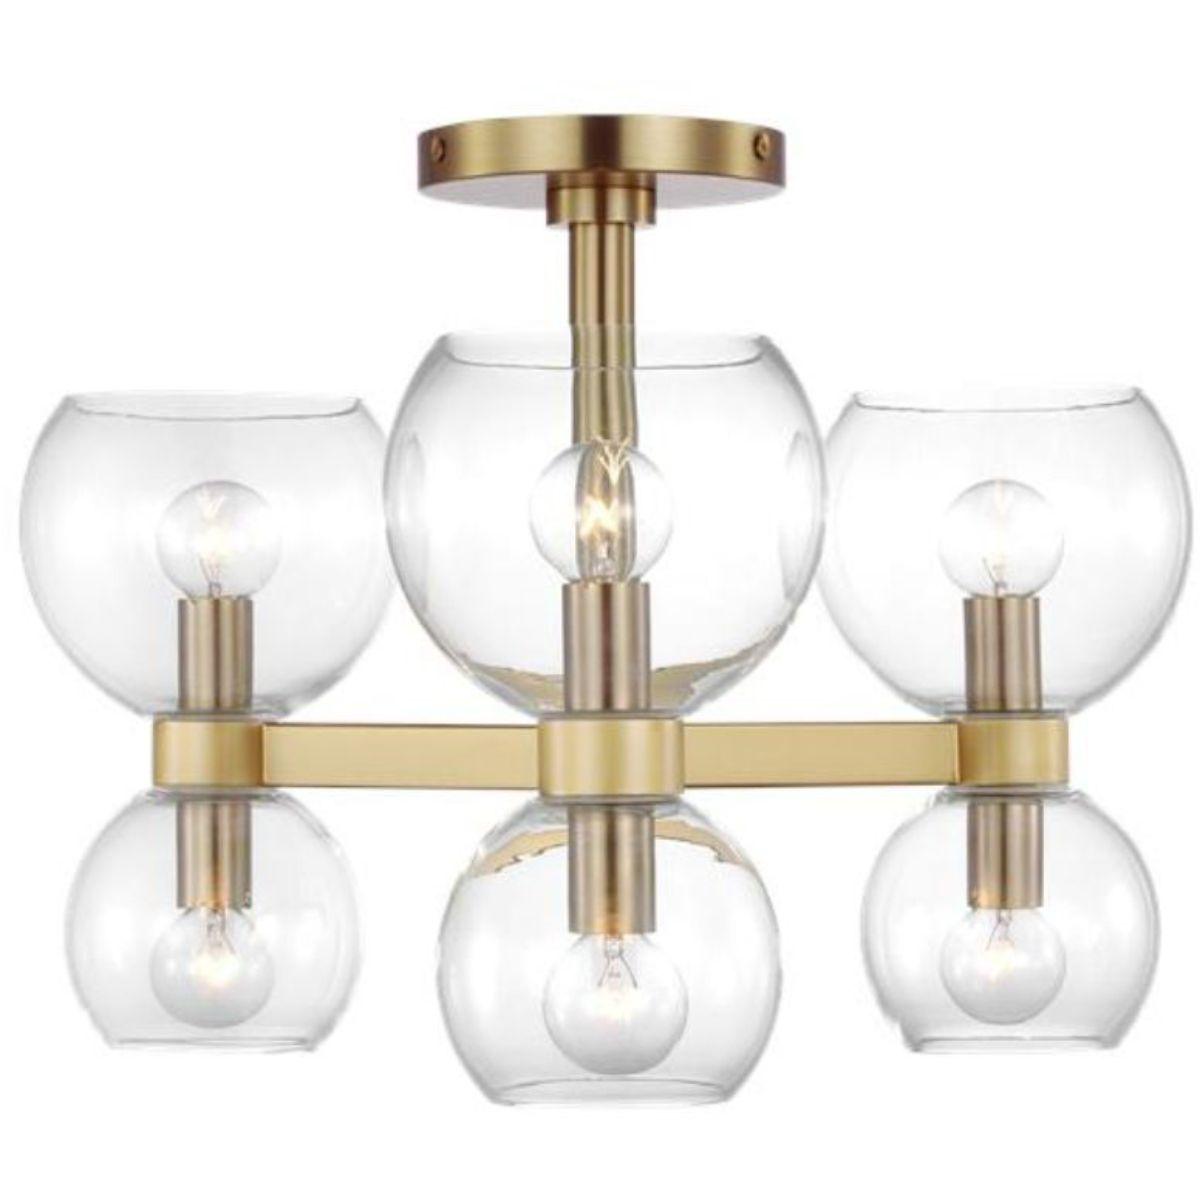 Londyn 20 in. 6 Lights Semi flush Mount Light Brushed Brass finish Clear Shade